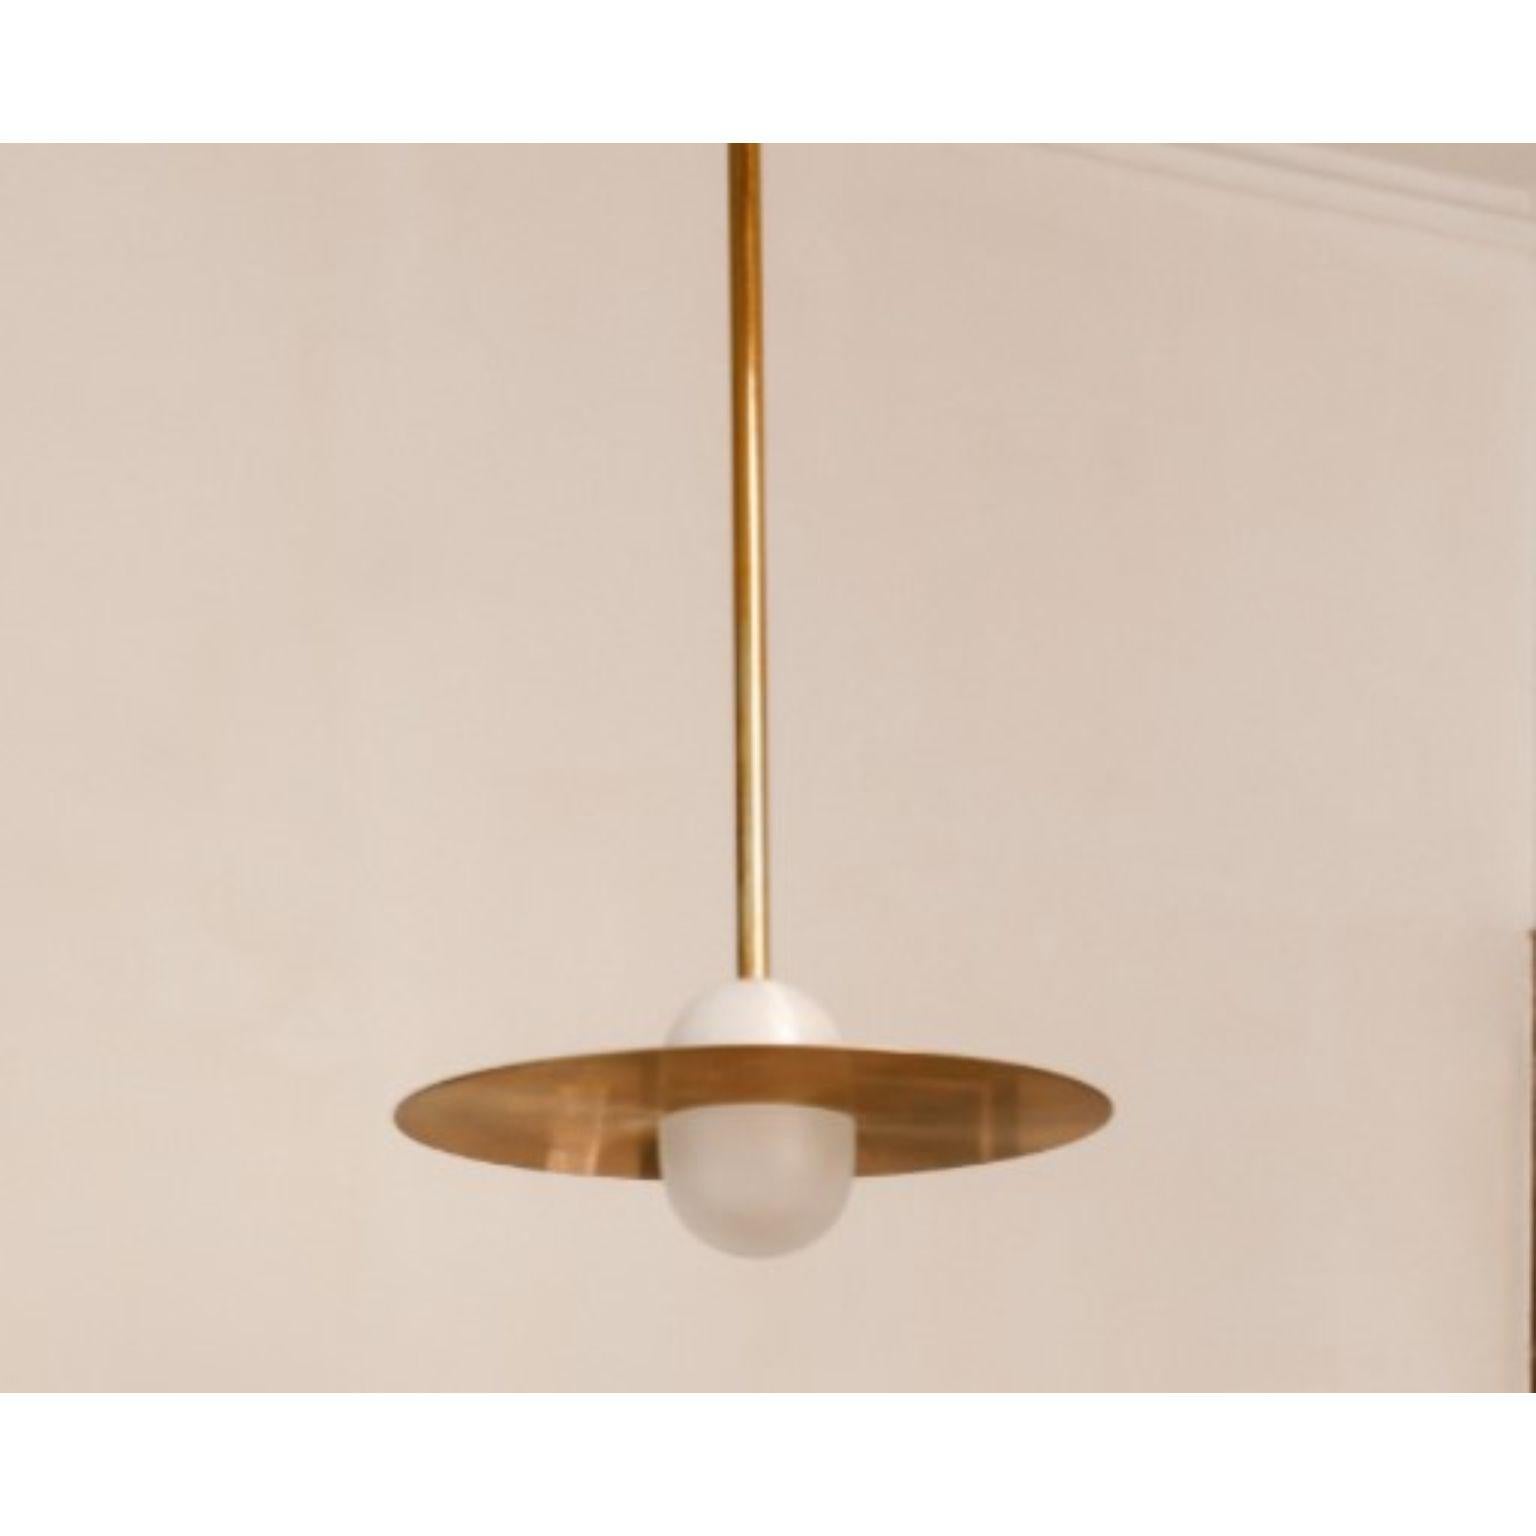 Alba pendant XL cable by Contain
Dimensions: D 22 x W 22 x H 100 cm (custom leght)
Materials: Brass, 3D printed PLA structure and optical lens.
Also available in different finishes.

All our lamps can be wired according to each country. If sold